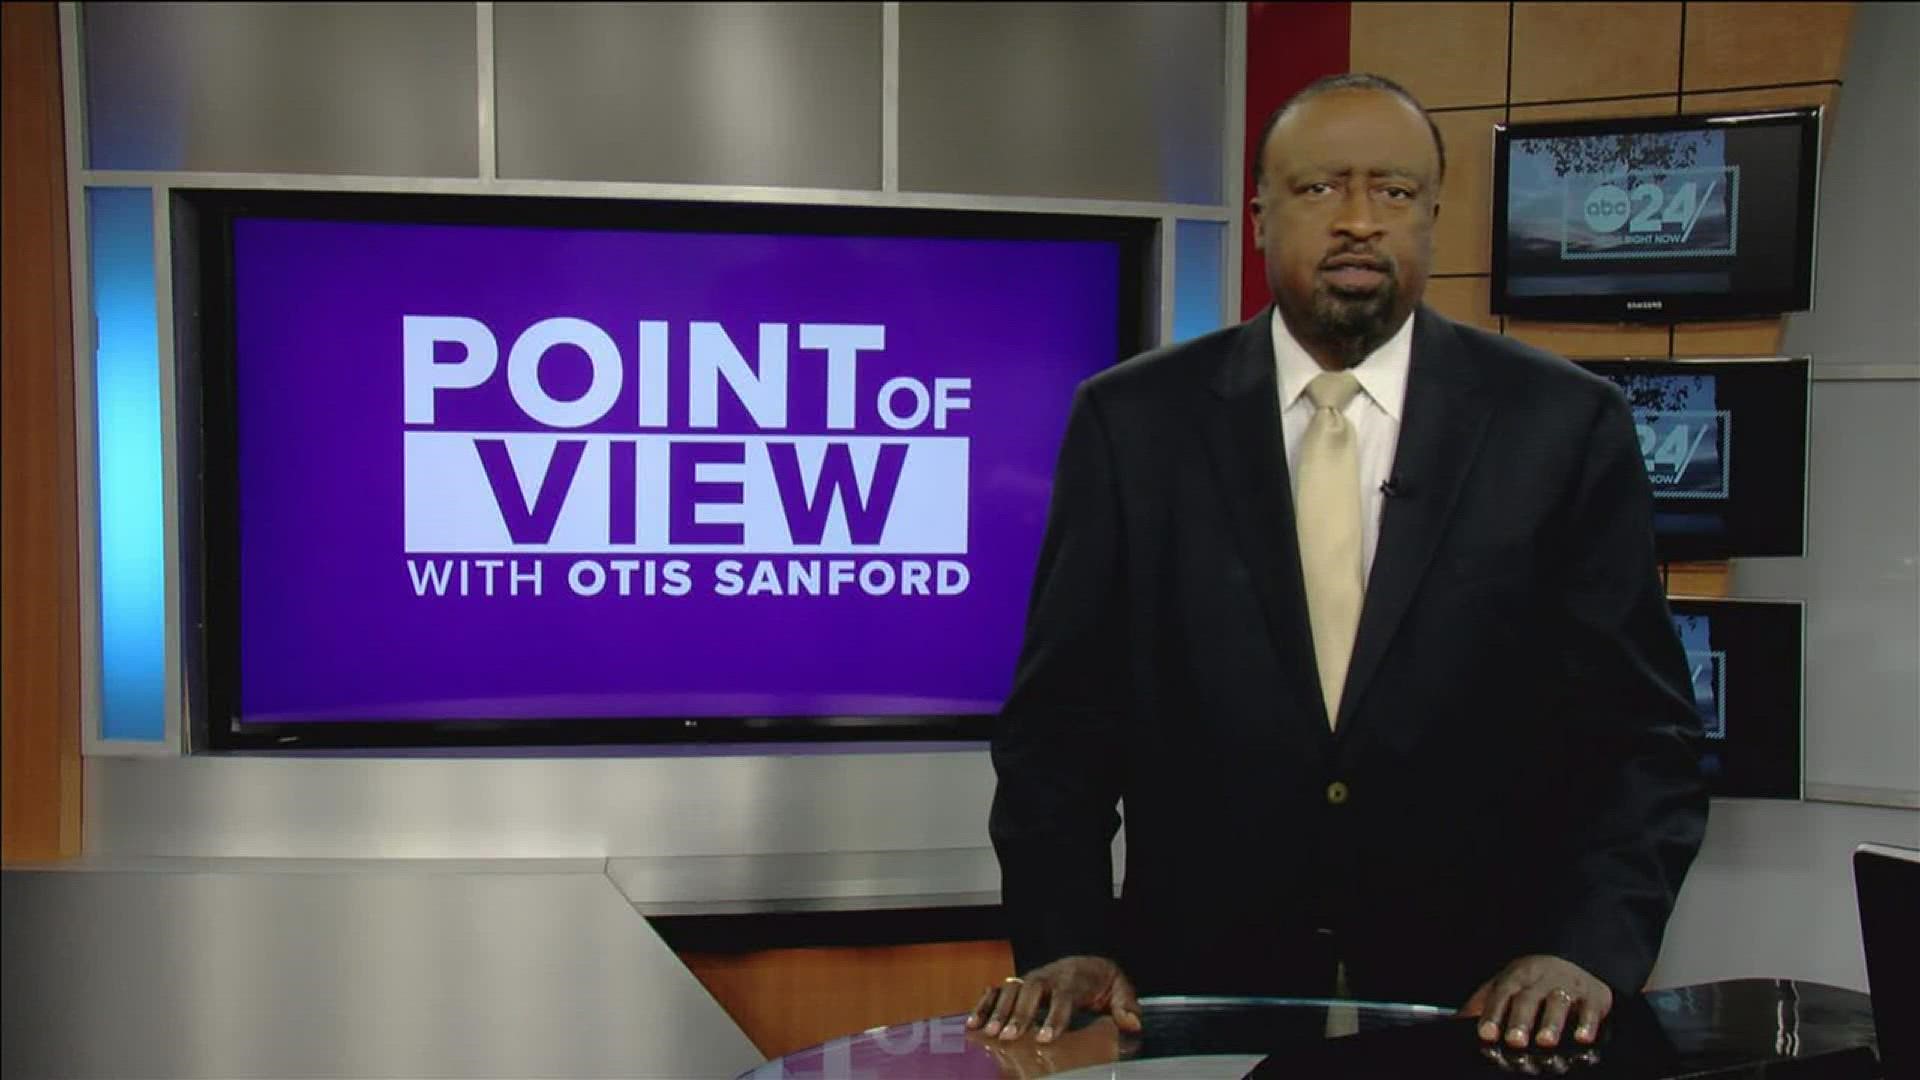 Political analyst and commentator Otis Sanford shared his point of view on Arkansas and the COVID-19 pandemic.